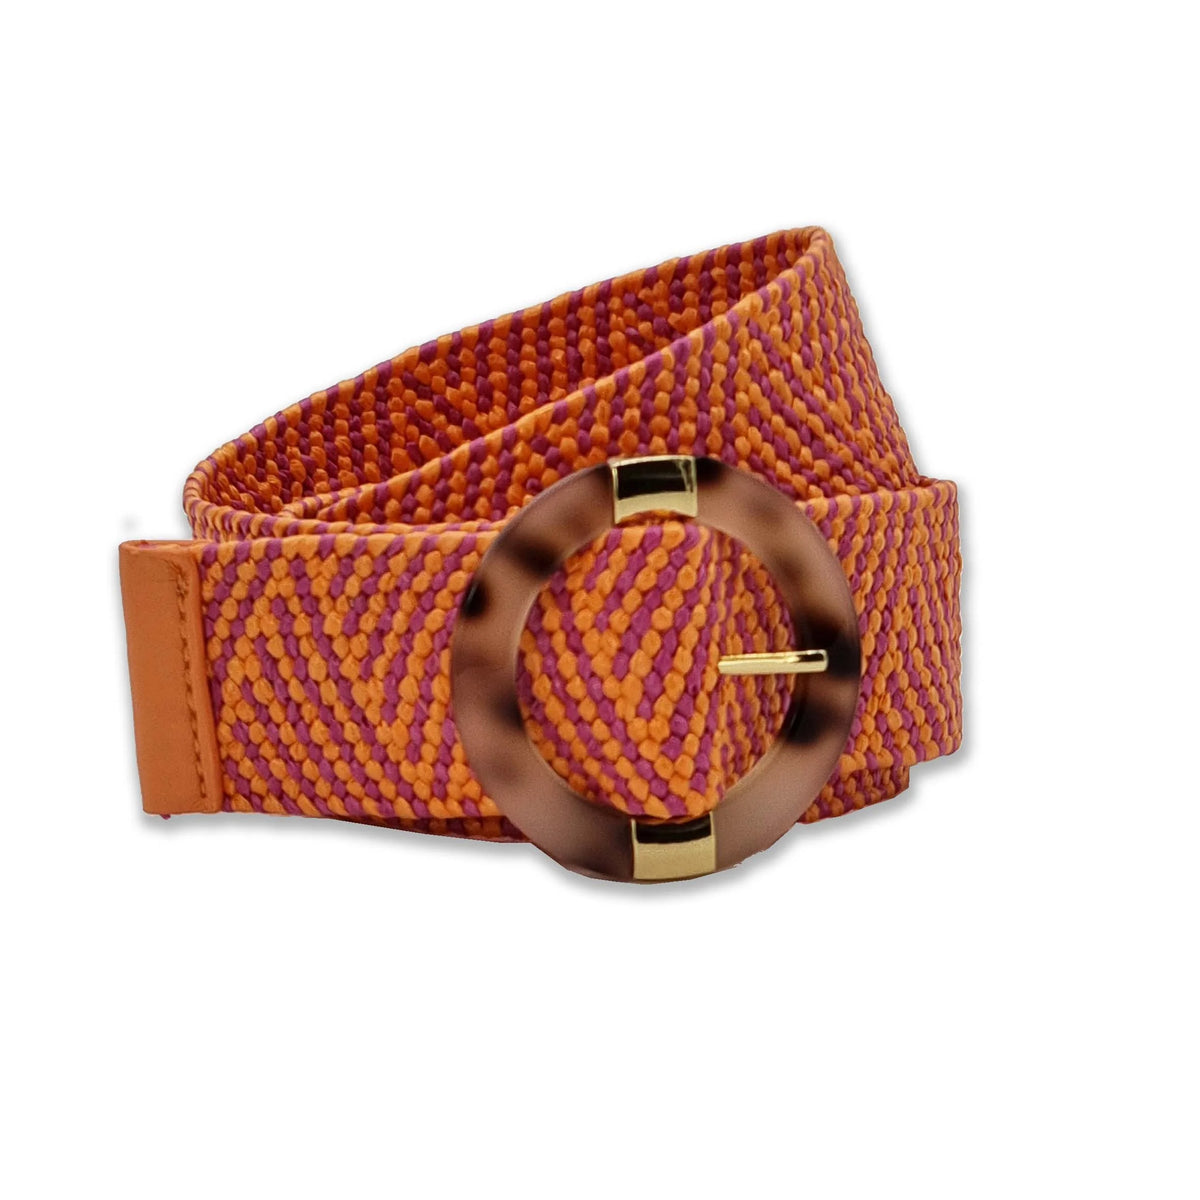 Pink and orange woven elasticated belt with circular resin buckle and gold trim